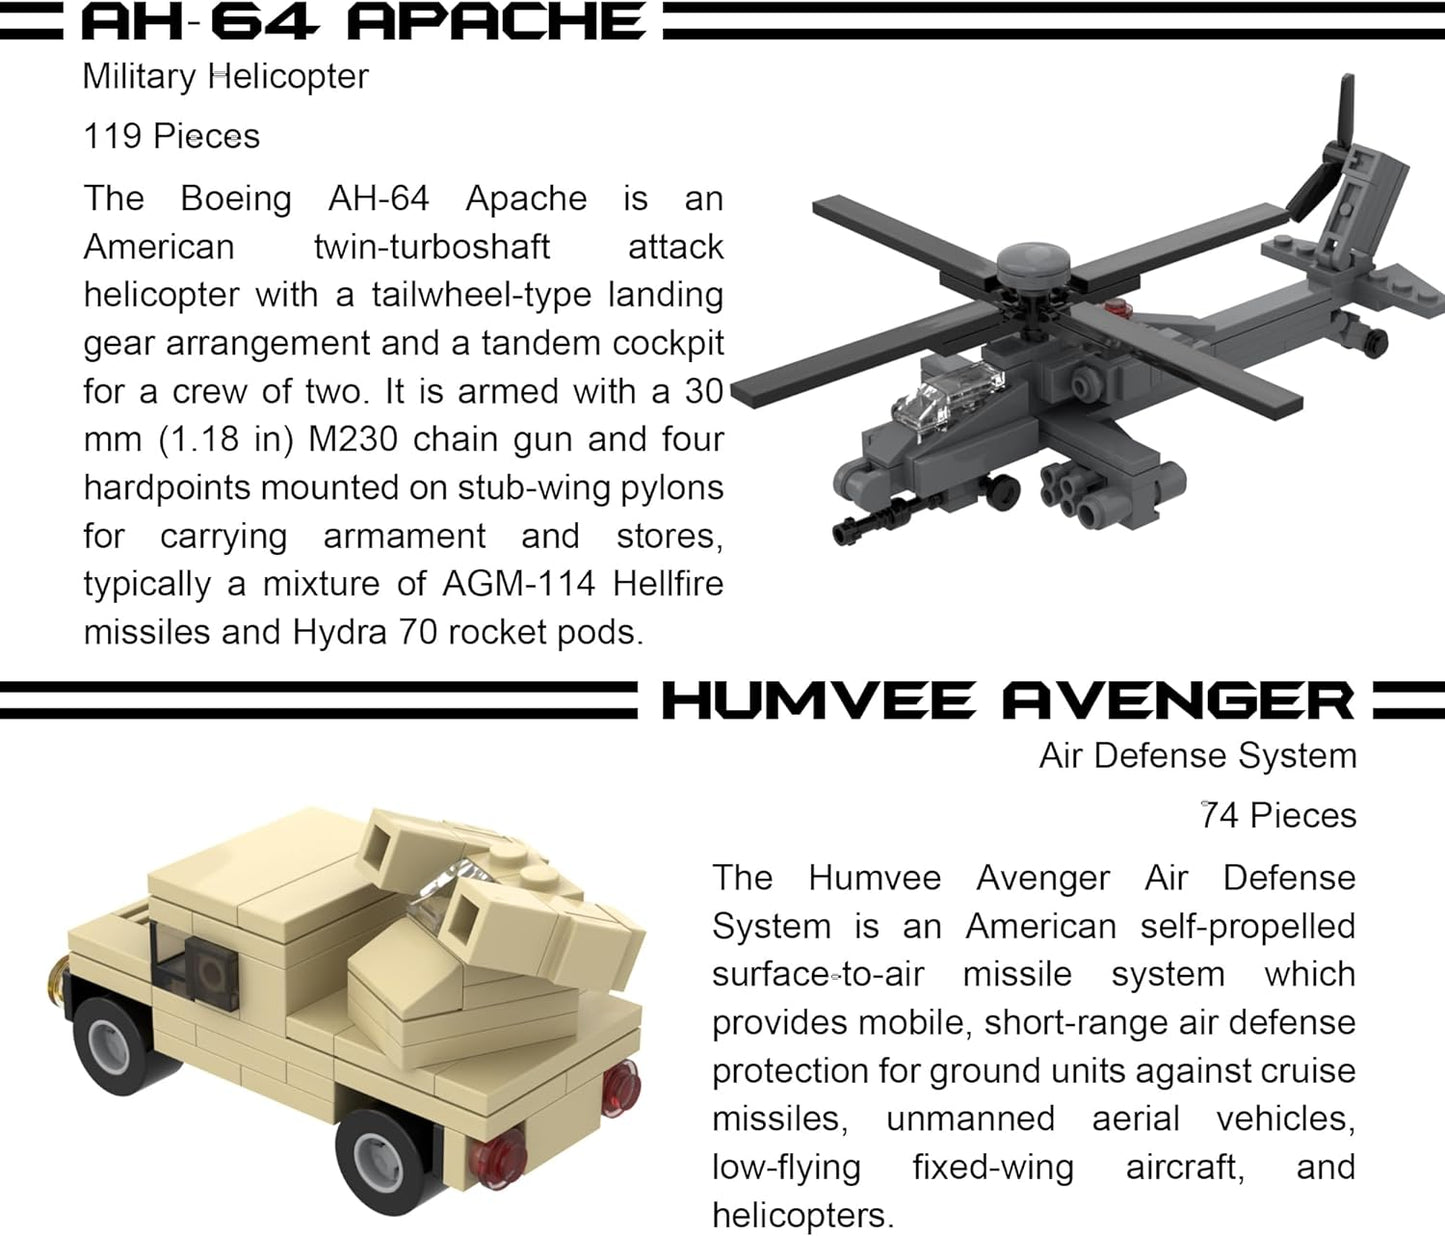 5 Military Building Block Sets (F/A-18 Hornet, F-14 Tomcat Fighter Jet, AH-64 Apache Helicopter, M2 Bradley Tank, and Humvee Avenger) - 728 Pieces